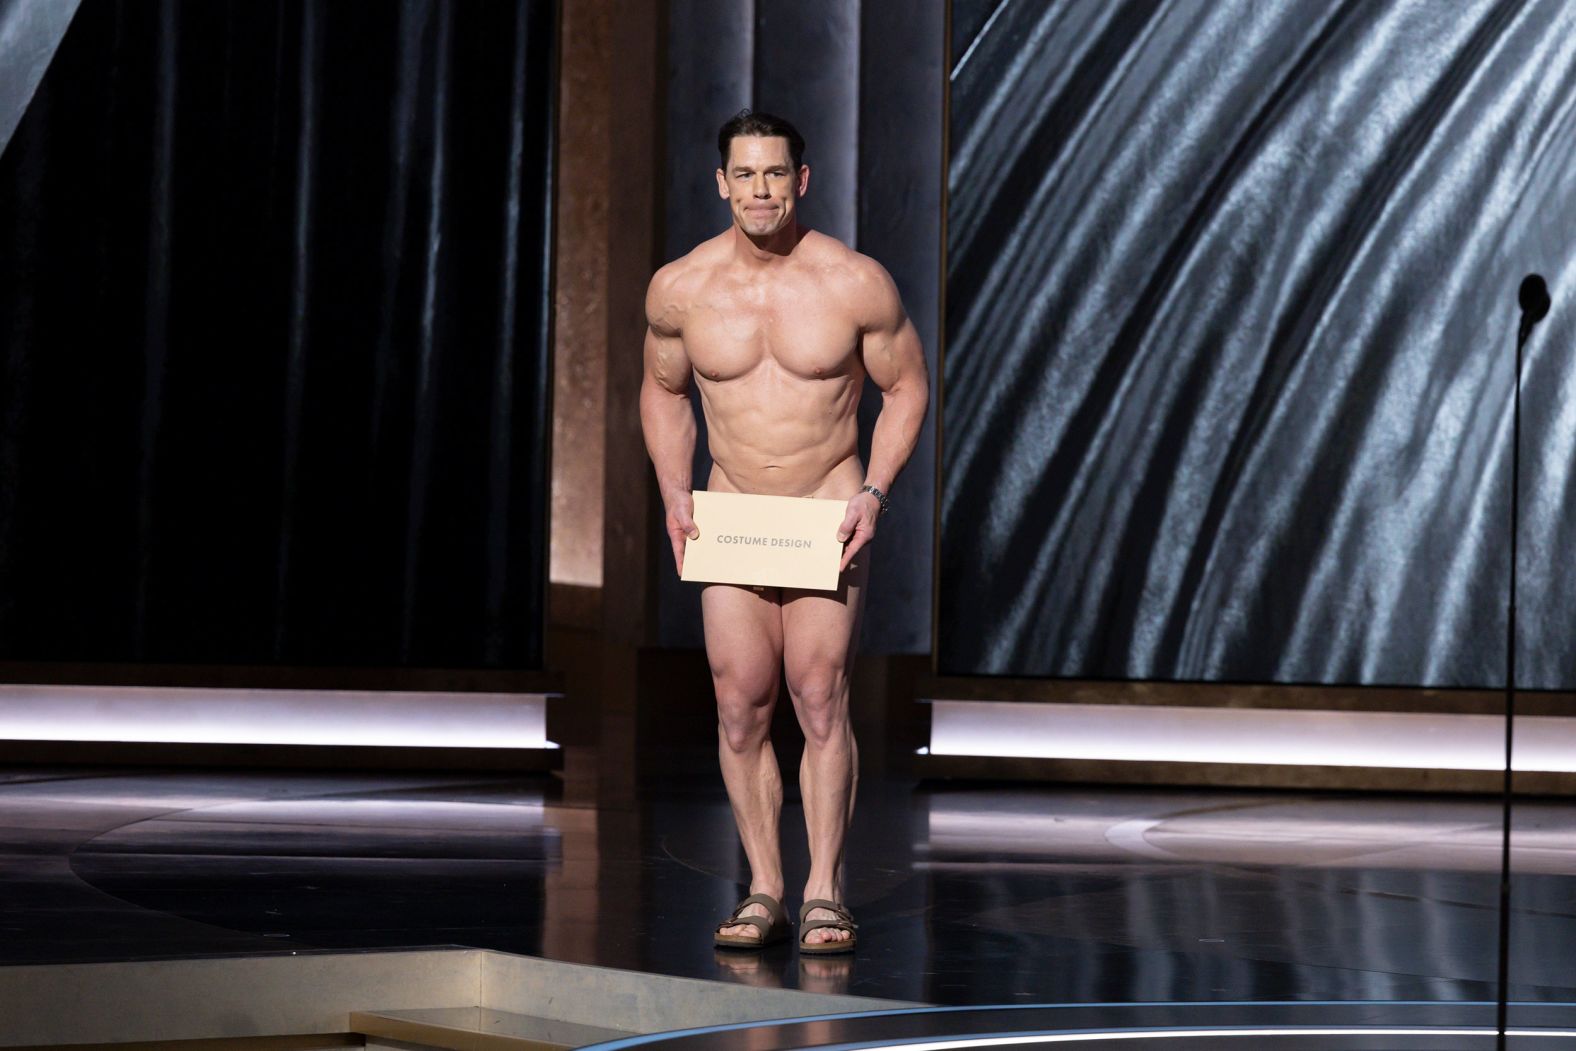 Cena presents the Oscar for best costume design. <a href="index.php?page=&url=https%3A%2F%2Fwww.cnn.com%2Fentertainment%2Flive-news%2Foscars-academy-awards-03-10-24%2Fh_839d82945edb96c8ca36efd588094968" target="_blank">During the bit</a>, show host Jimmy Kimmel coaxed Cena out on stage after Cena had second thoughts about streaking across stage. "Costumes are so important," Cena joked before presenting the Oscar to Waddington and "Poor Things."